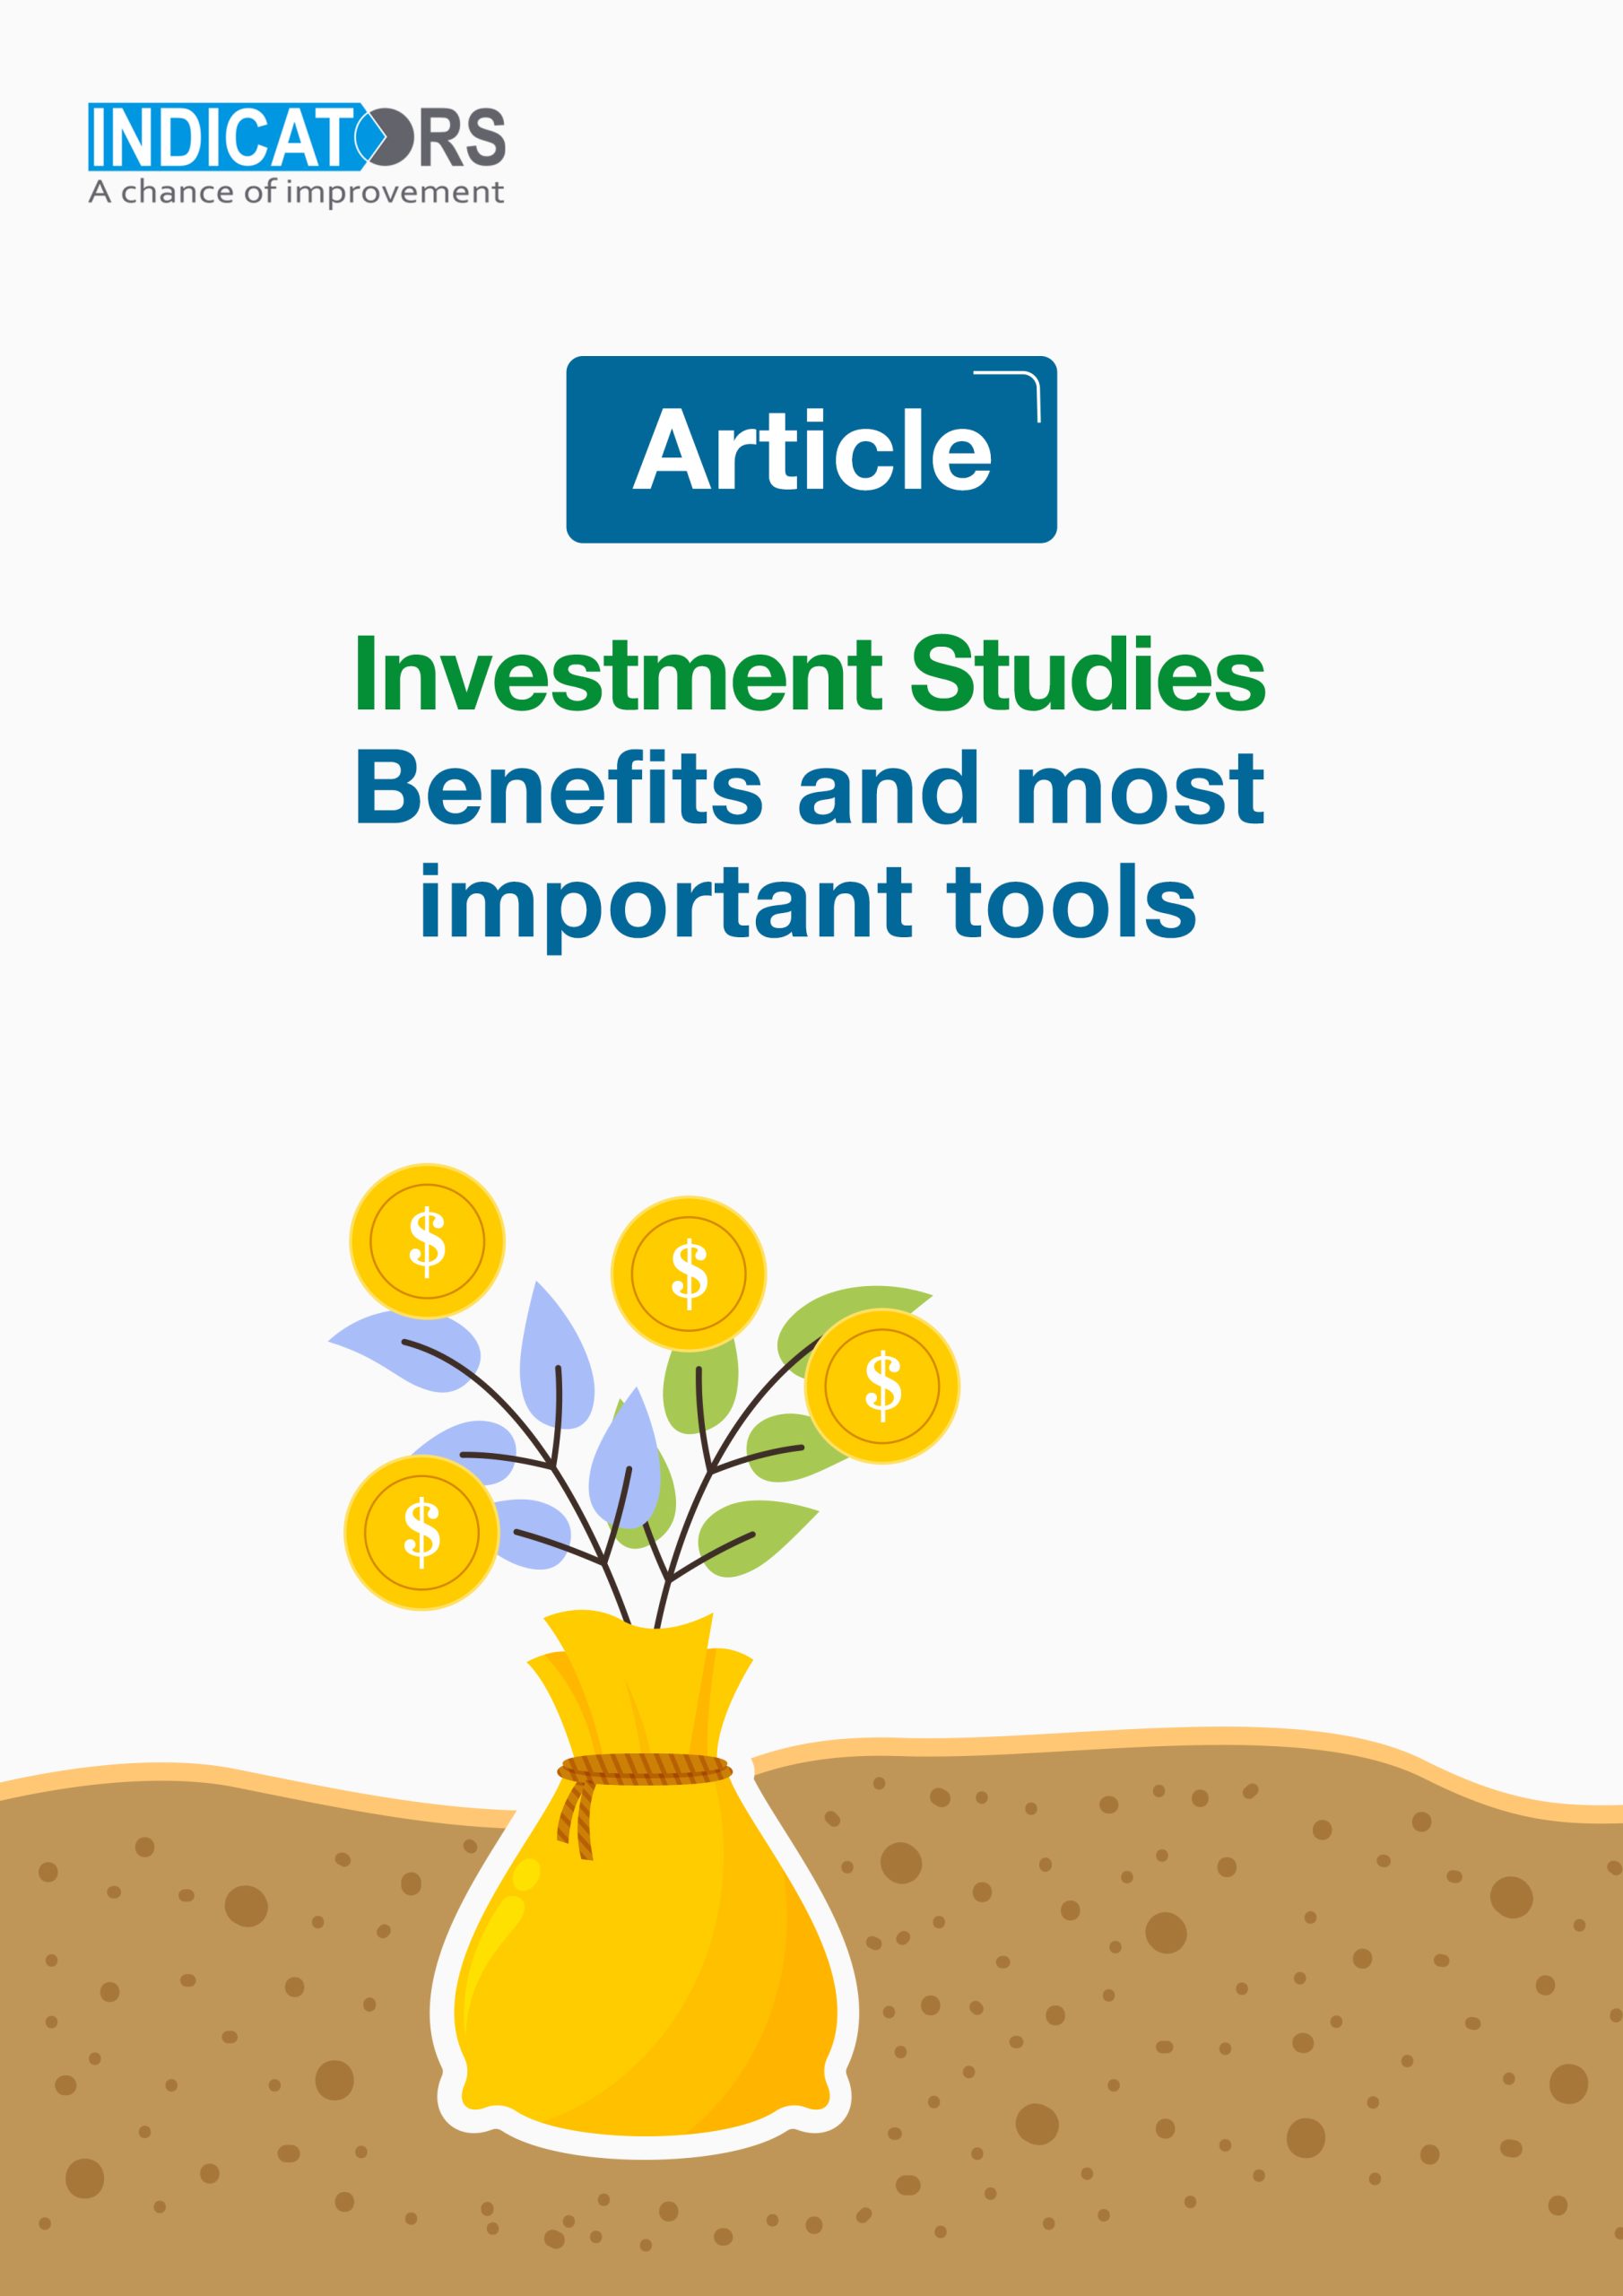 INVESTMENT STUDIES BENEFITS AND MOST IMPORTANT TOOLS